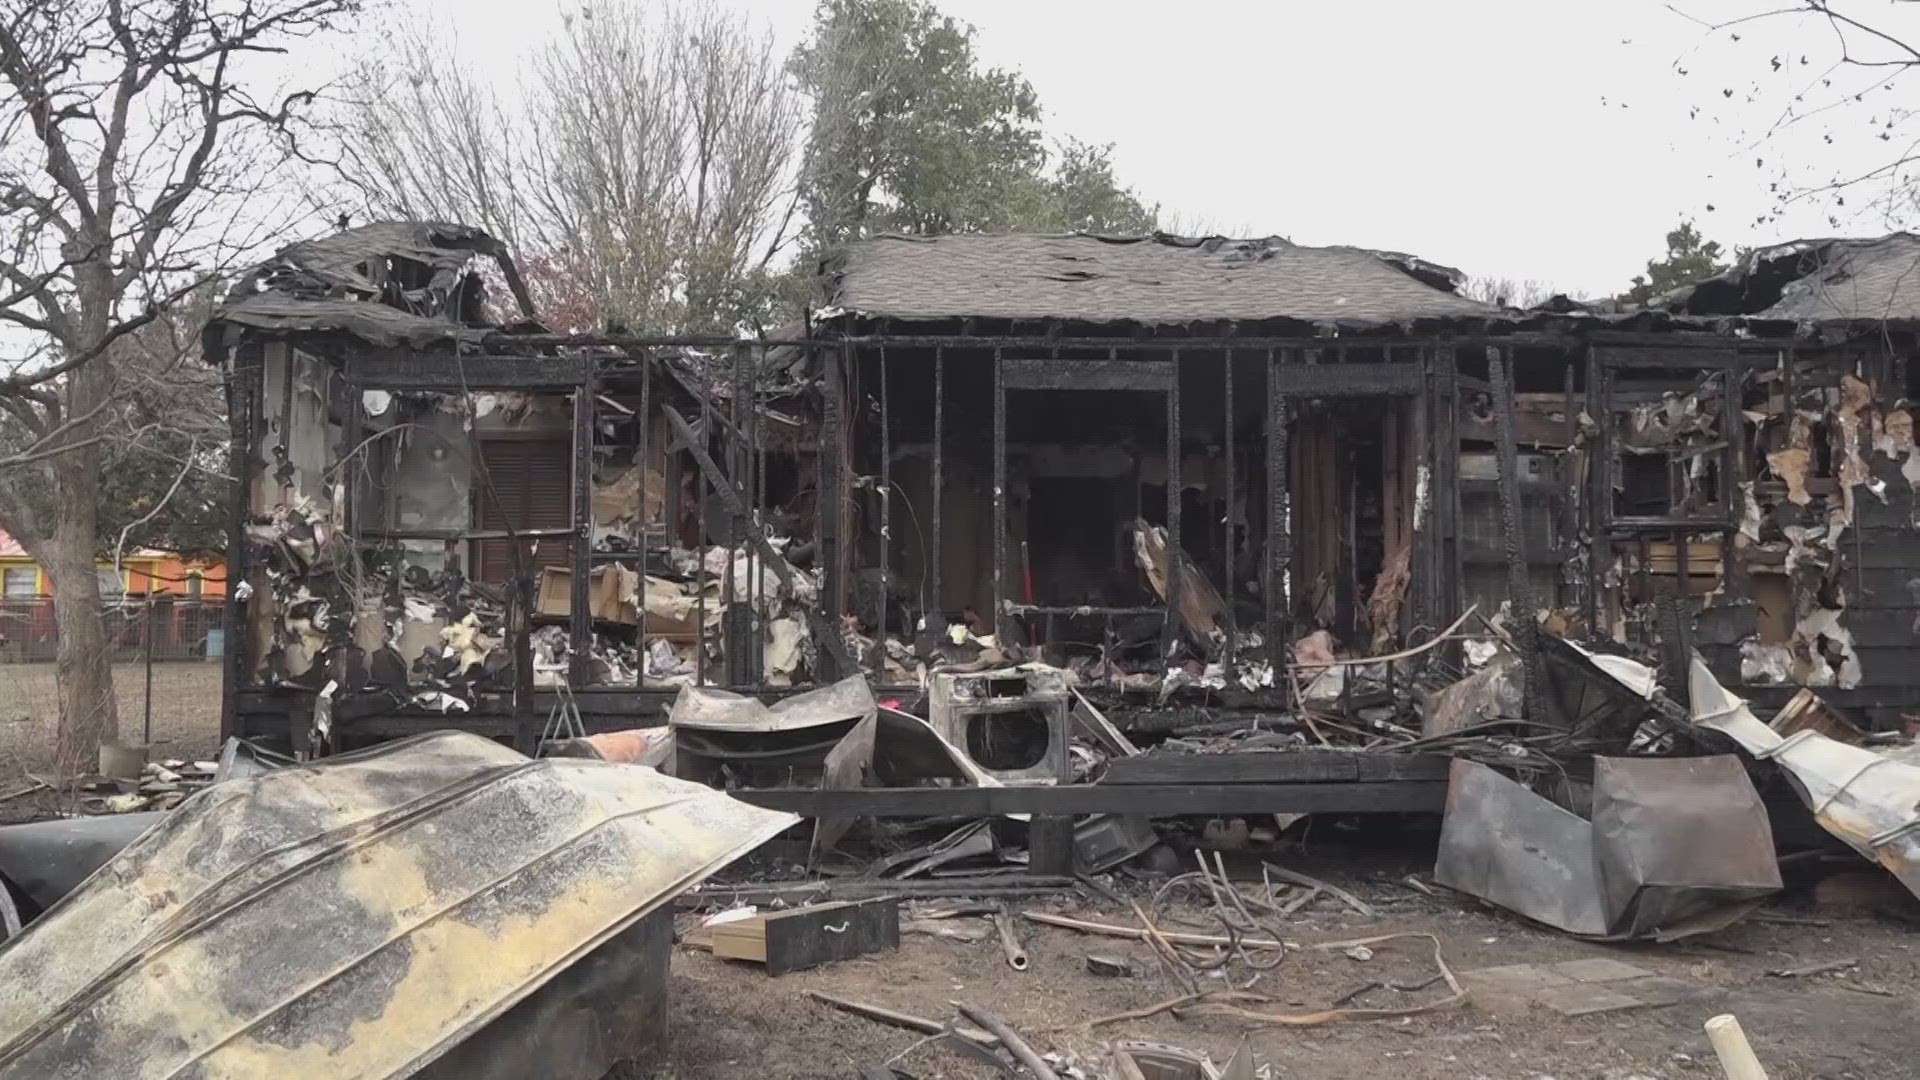 The Atascosa family is looking to rebuild, but are in need of a helping hand.